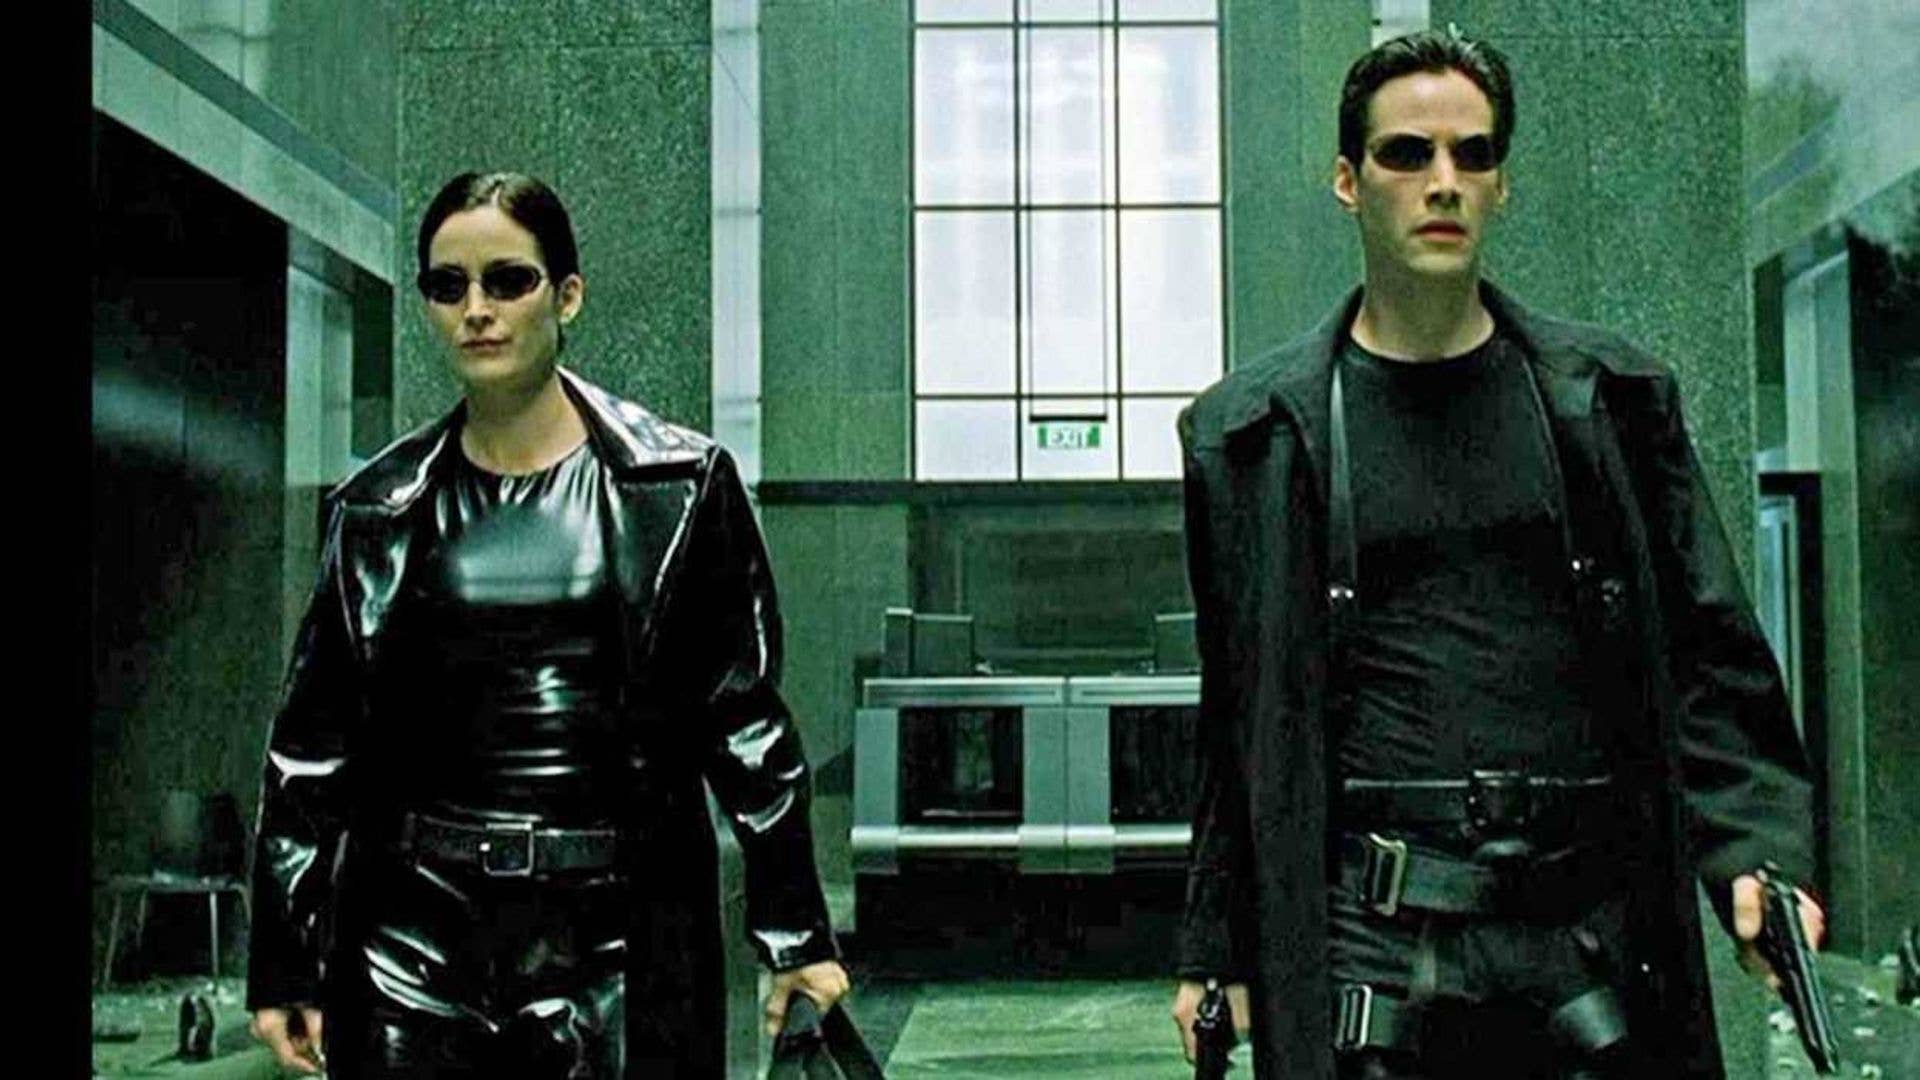 Trinity and Neo, dressed in leather and armed to the teeth, stride through an office building lobby.